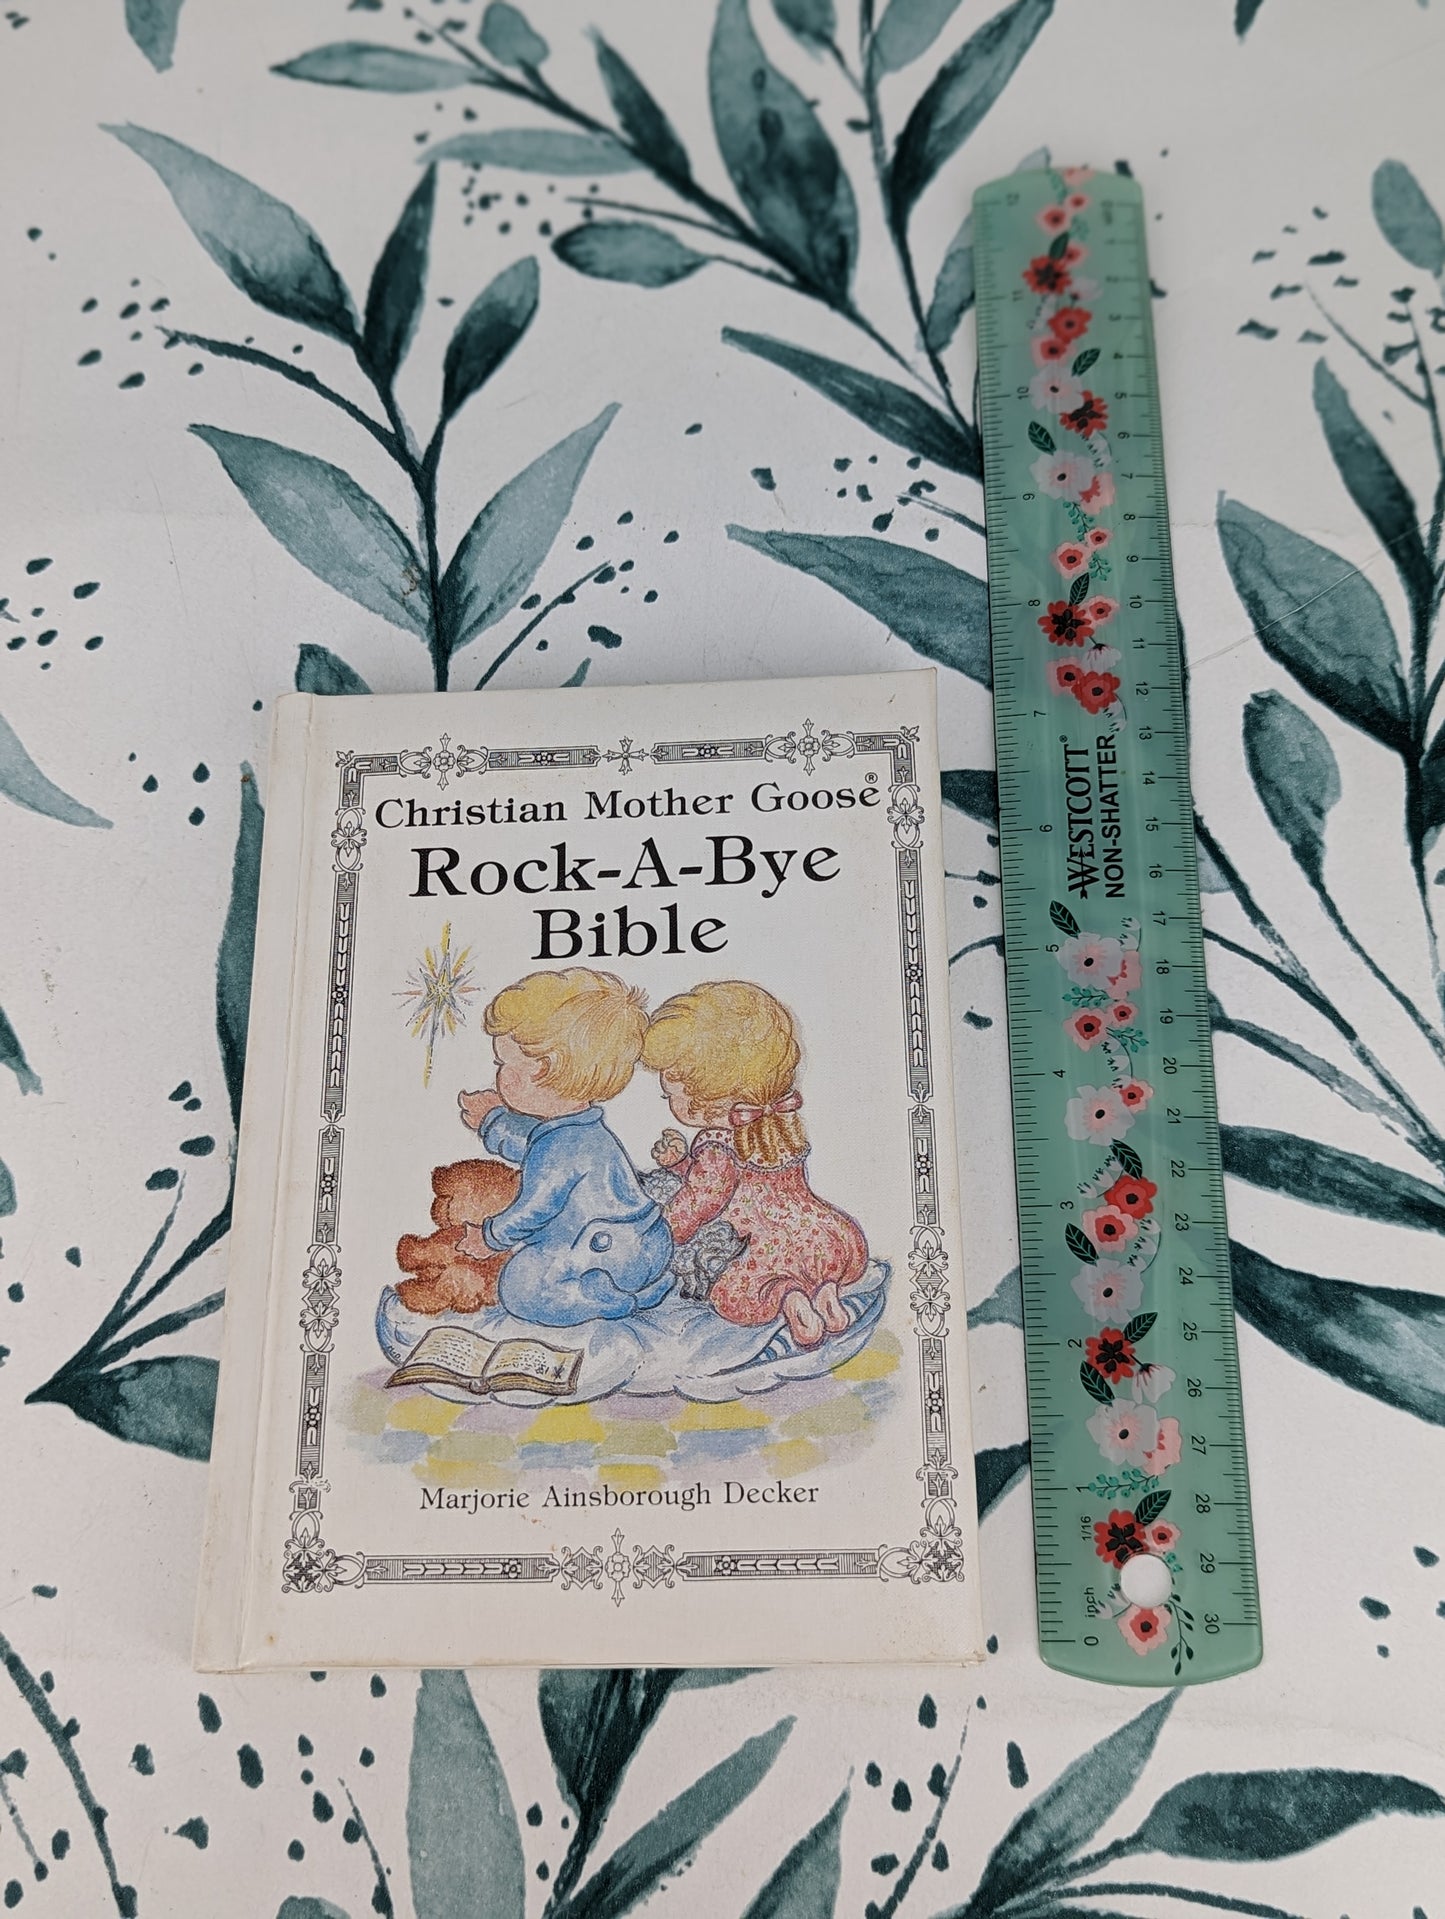 The Christian Mother Goose Rock-A-Bye Bible